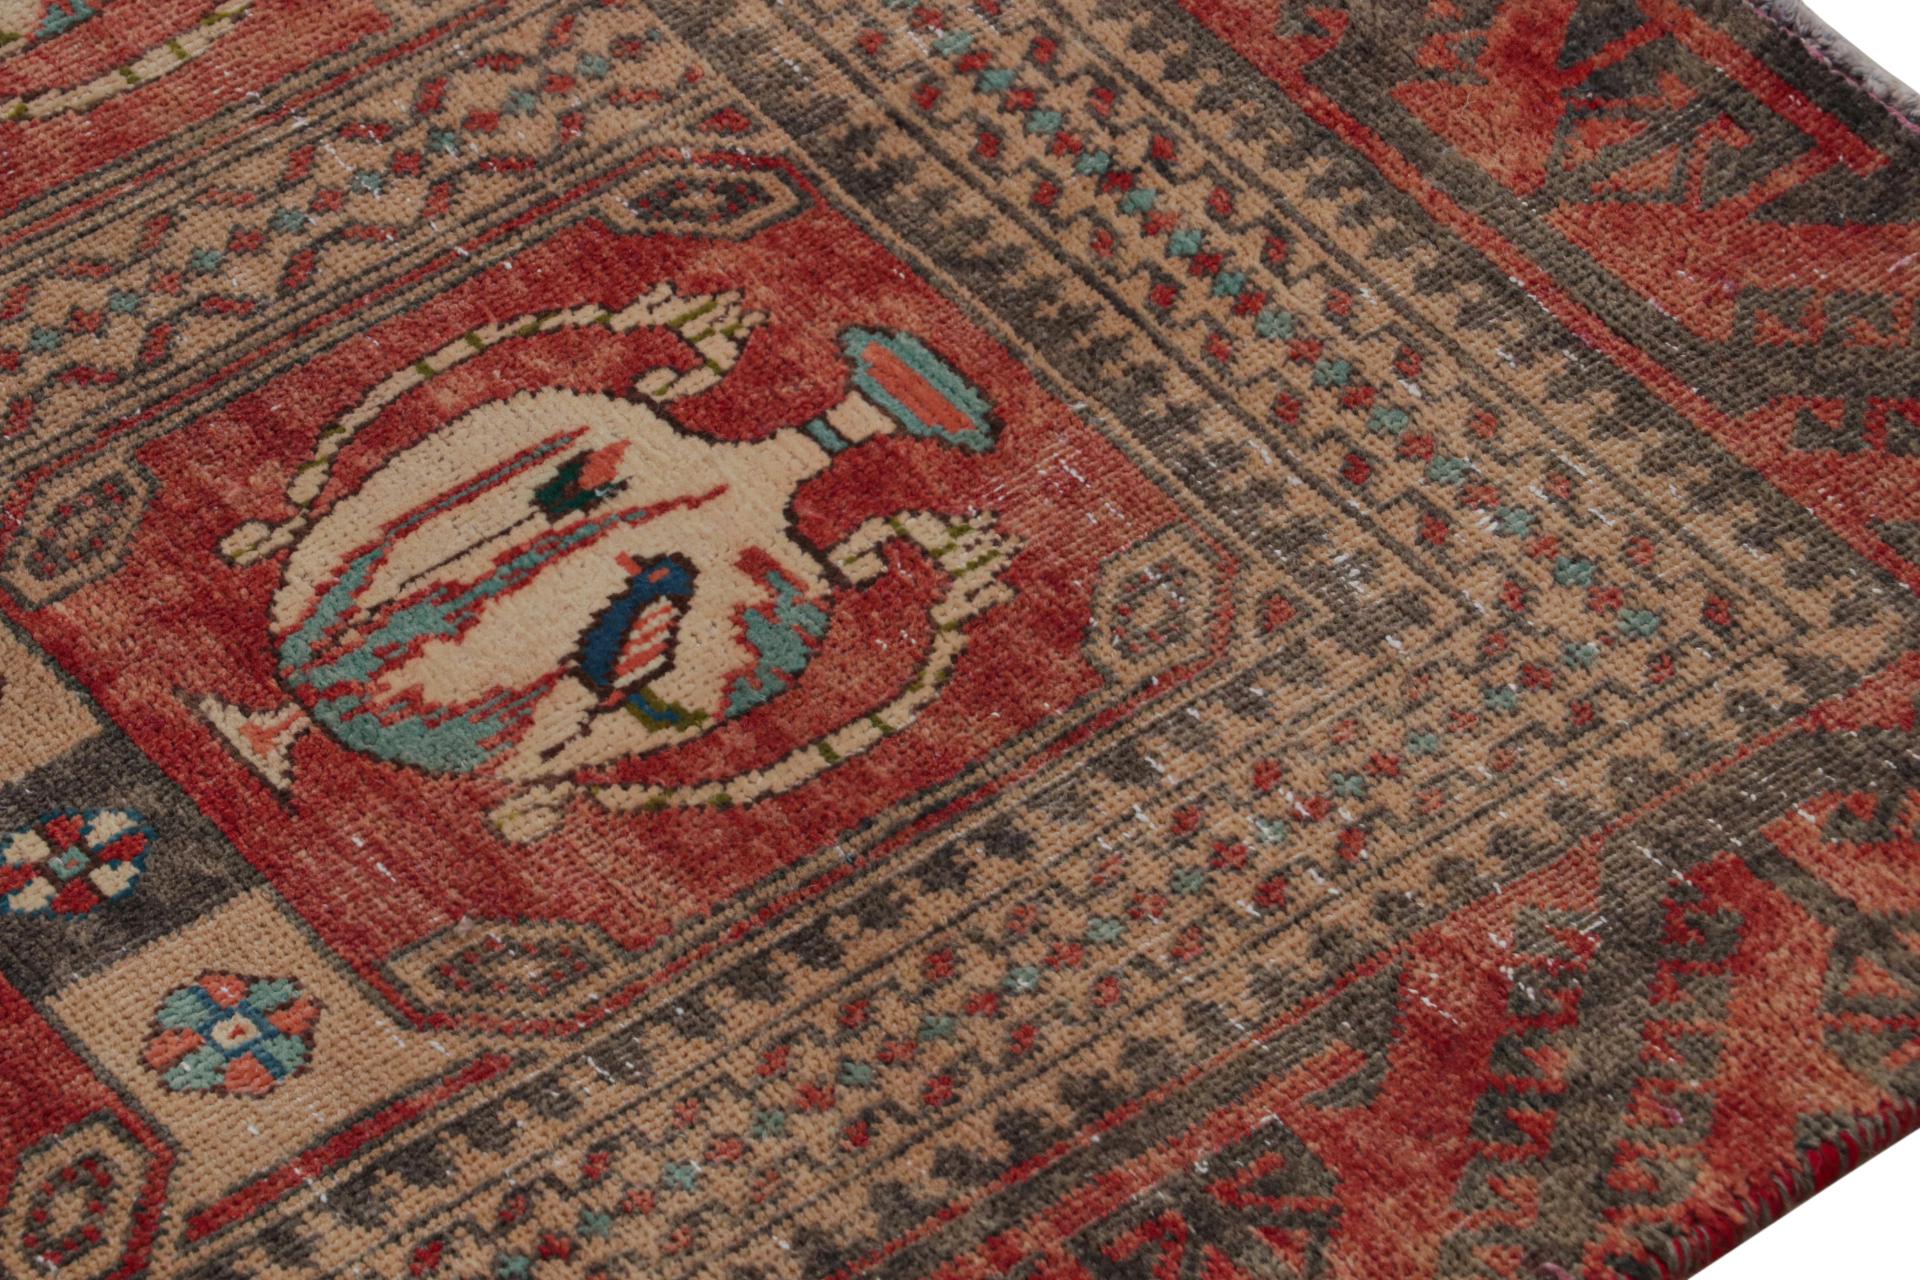 Vintage Persian Shiraz runner rug in Red, Beige & Blue Pictorial Patterns In Good Condition For Sale In Long Island City, NY